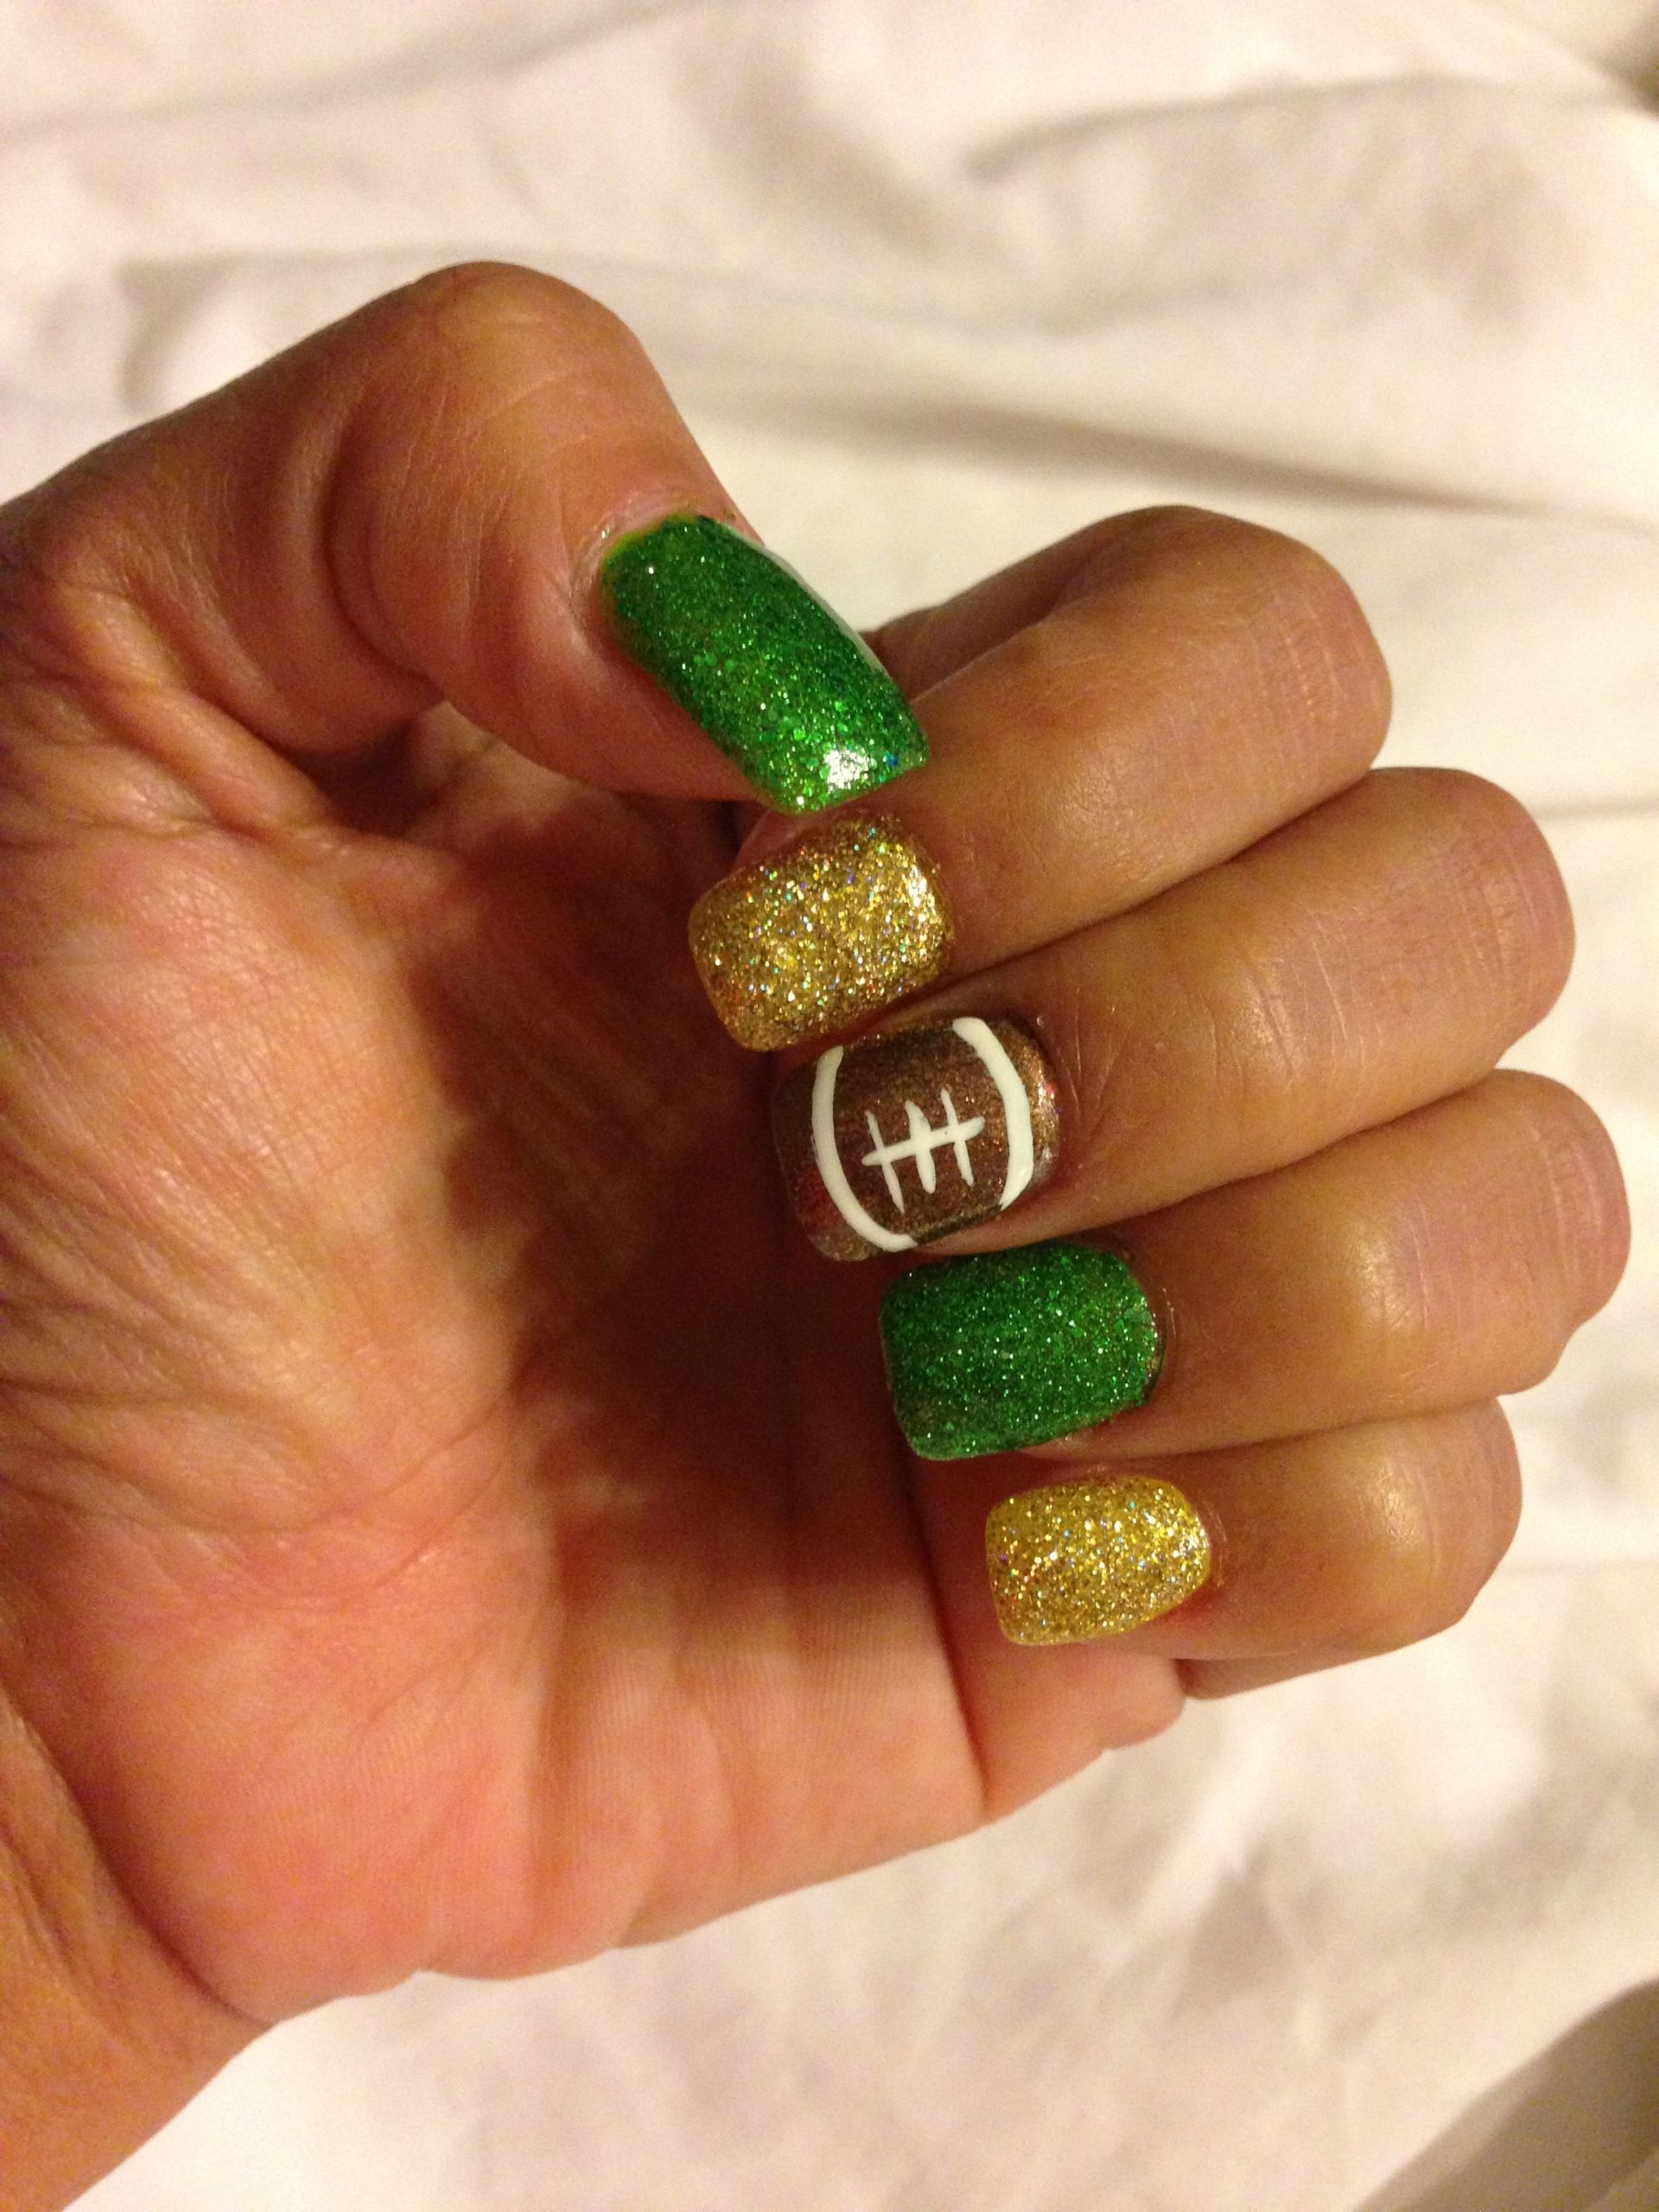 Green Bay Packers Nail Designs
 Green Bay packers nails Totally not a packers fan